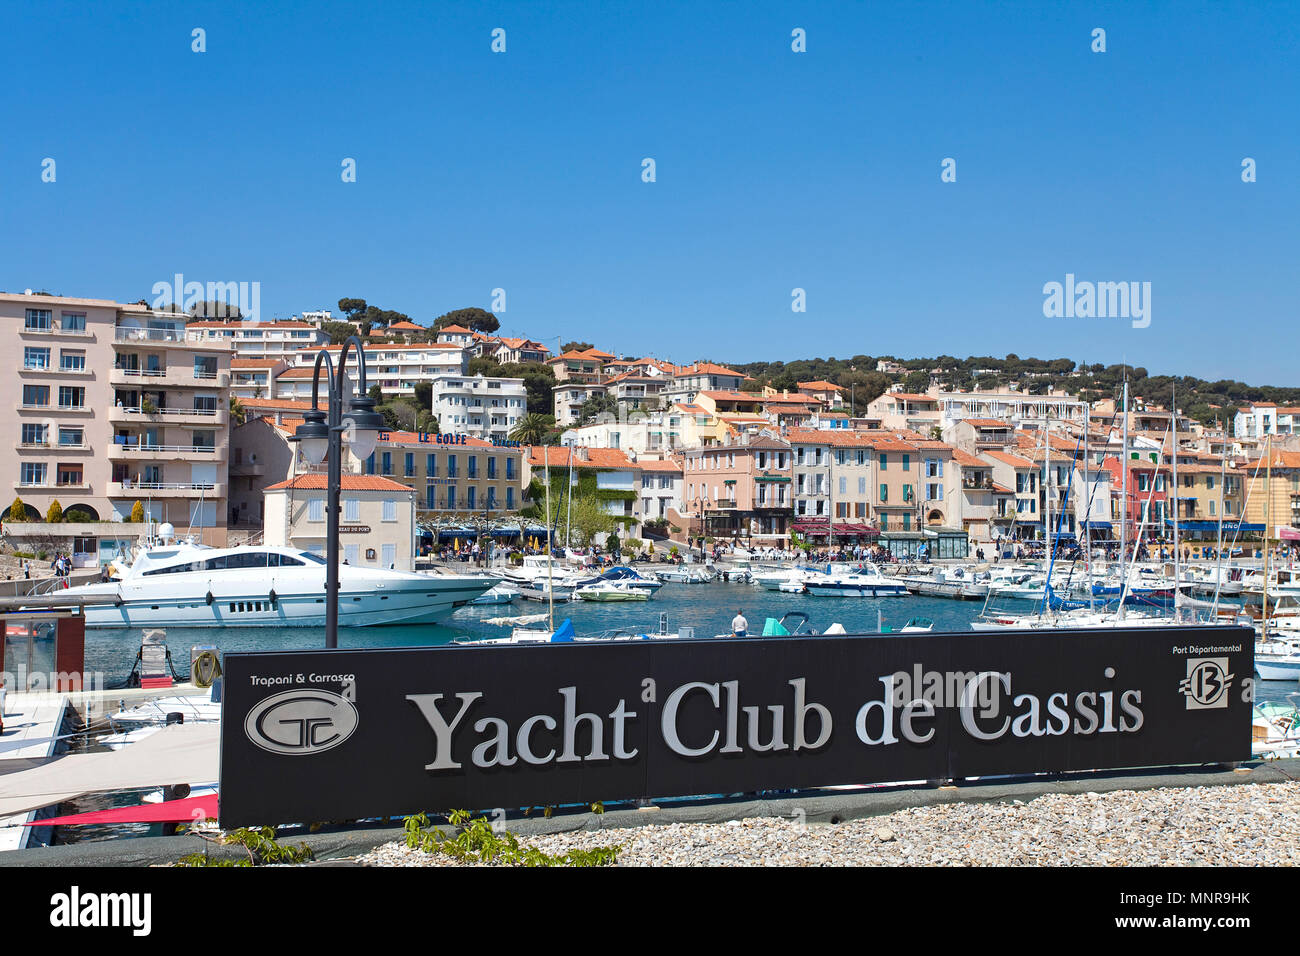 Marina and fishery harbour of Cassis, Bouches-du-Rhone, Provence-Alpes-Côte d’Azur, South France, France, Europe Stock Photo